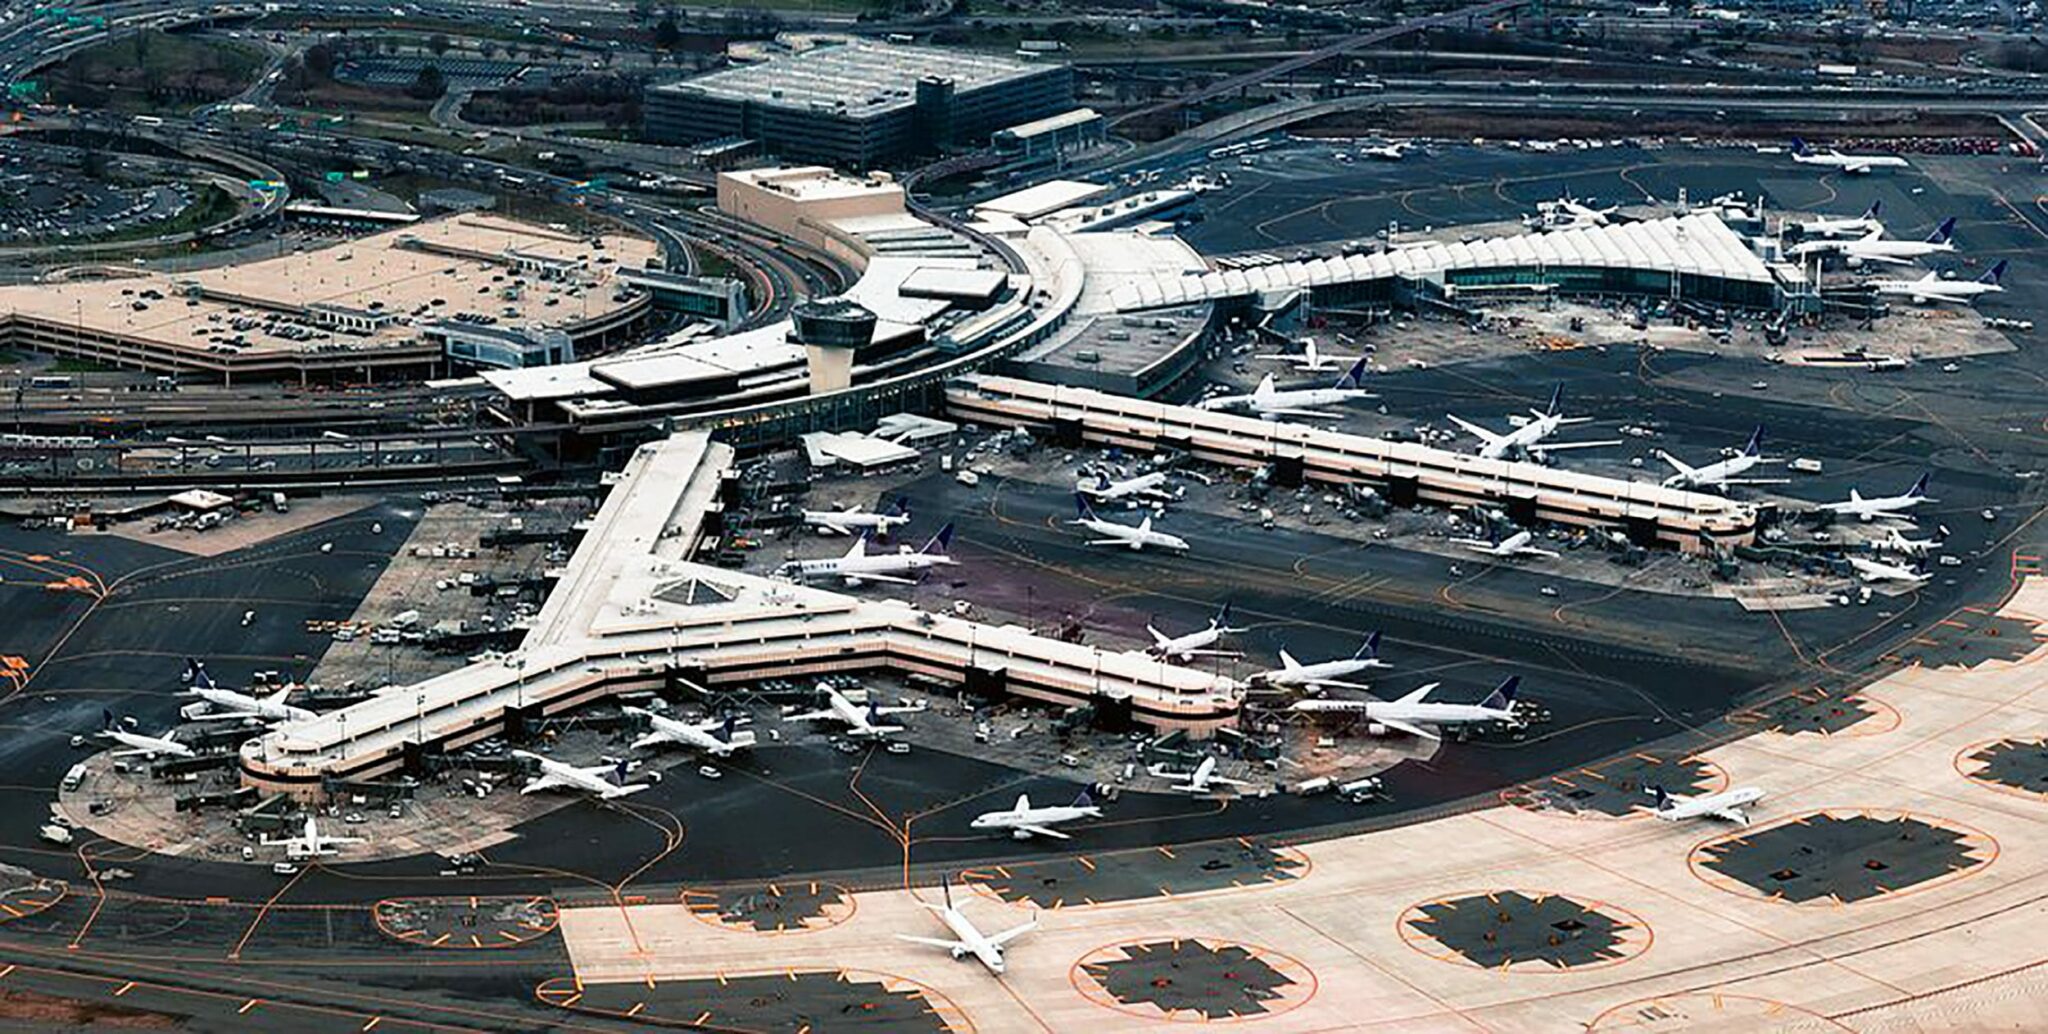 what is the busiest airport in the united states and which is the second busiest airport